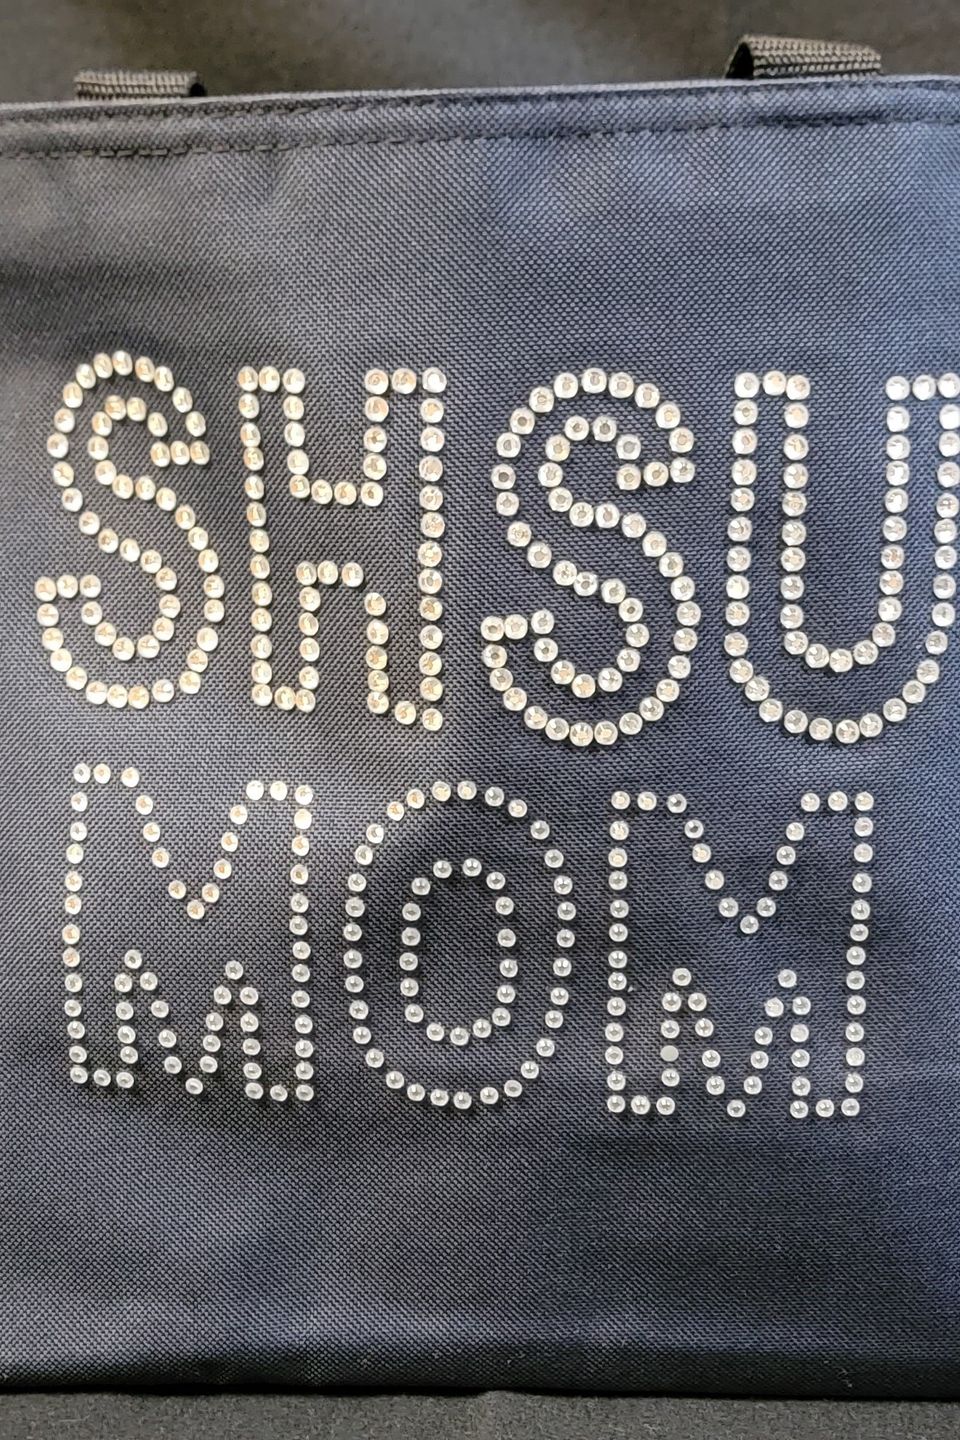 This is an example of a navy tote bag decorated with rhinestone bling that reads "SHSU MOM".